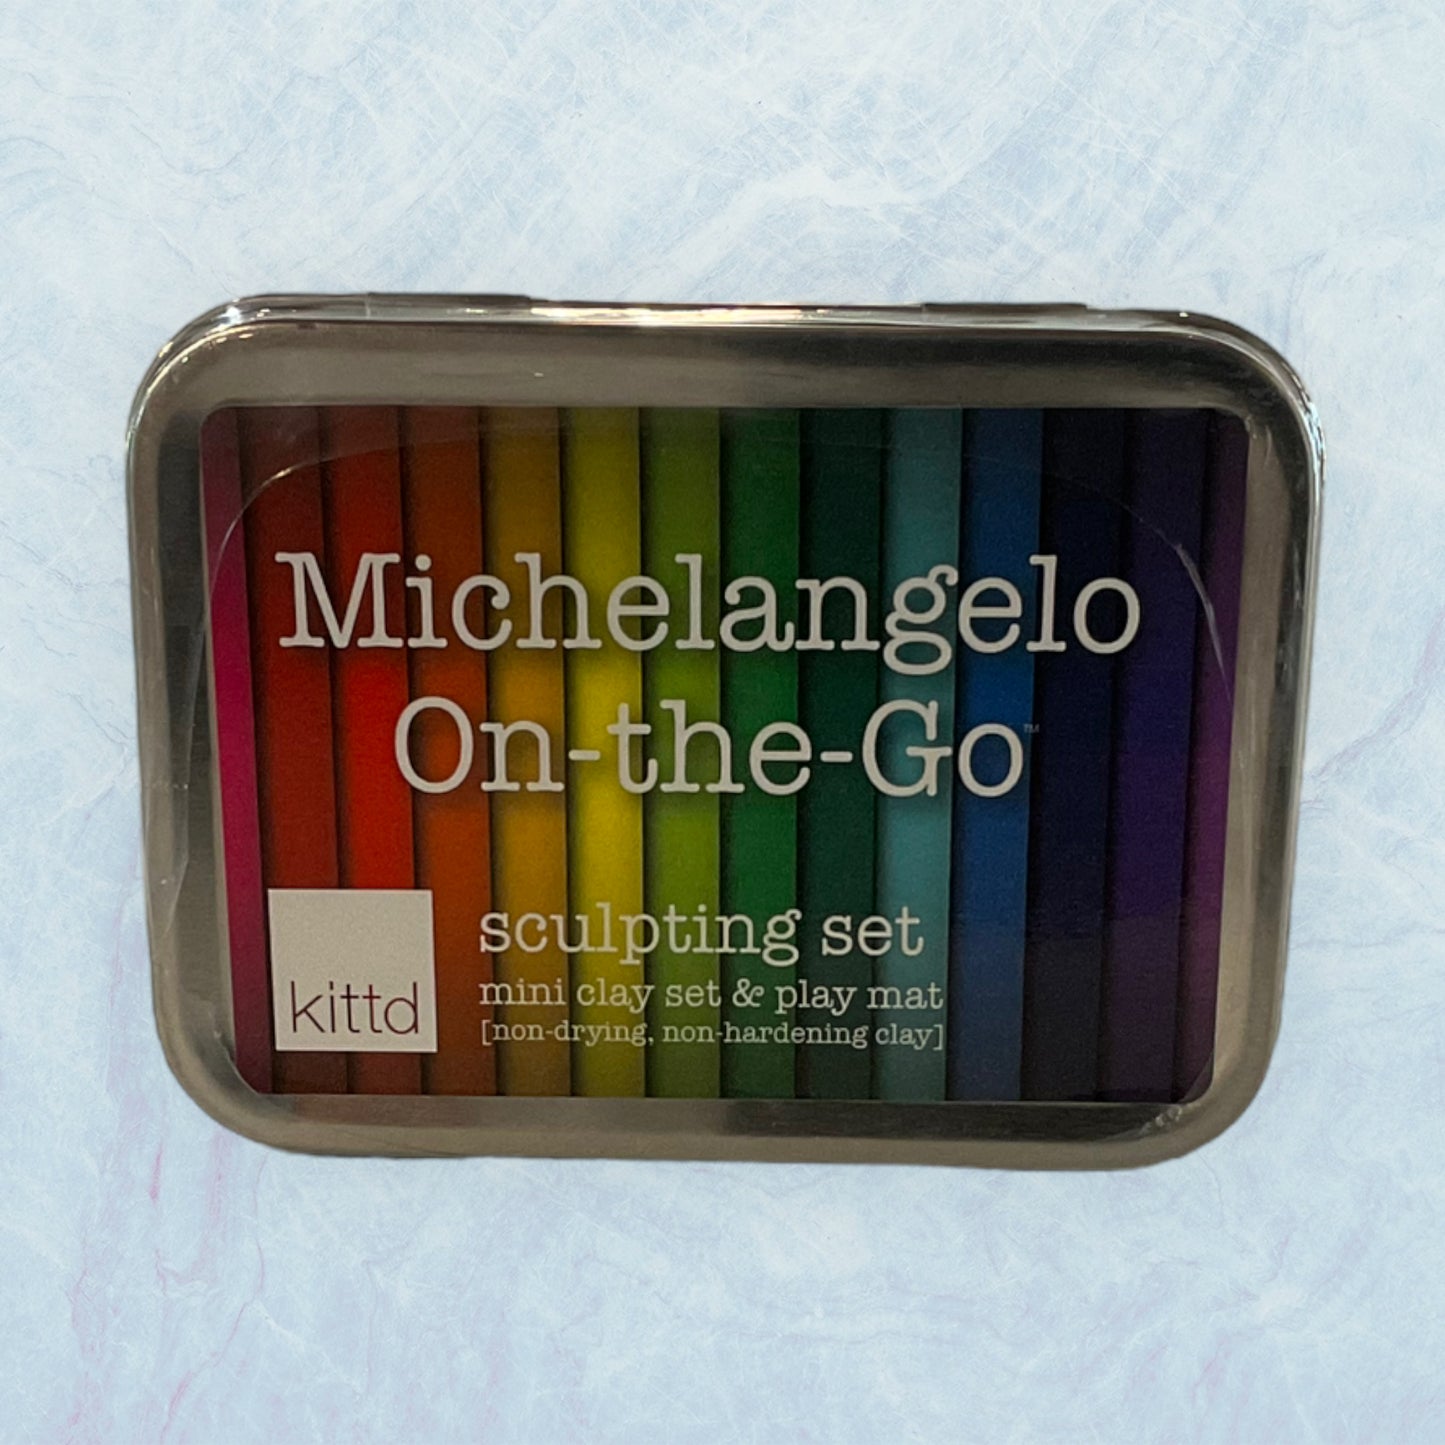 Michelangelo On the Go